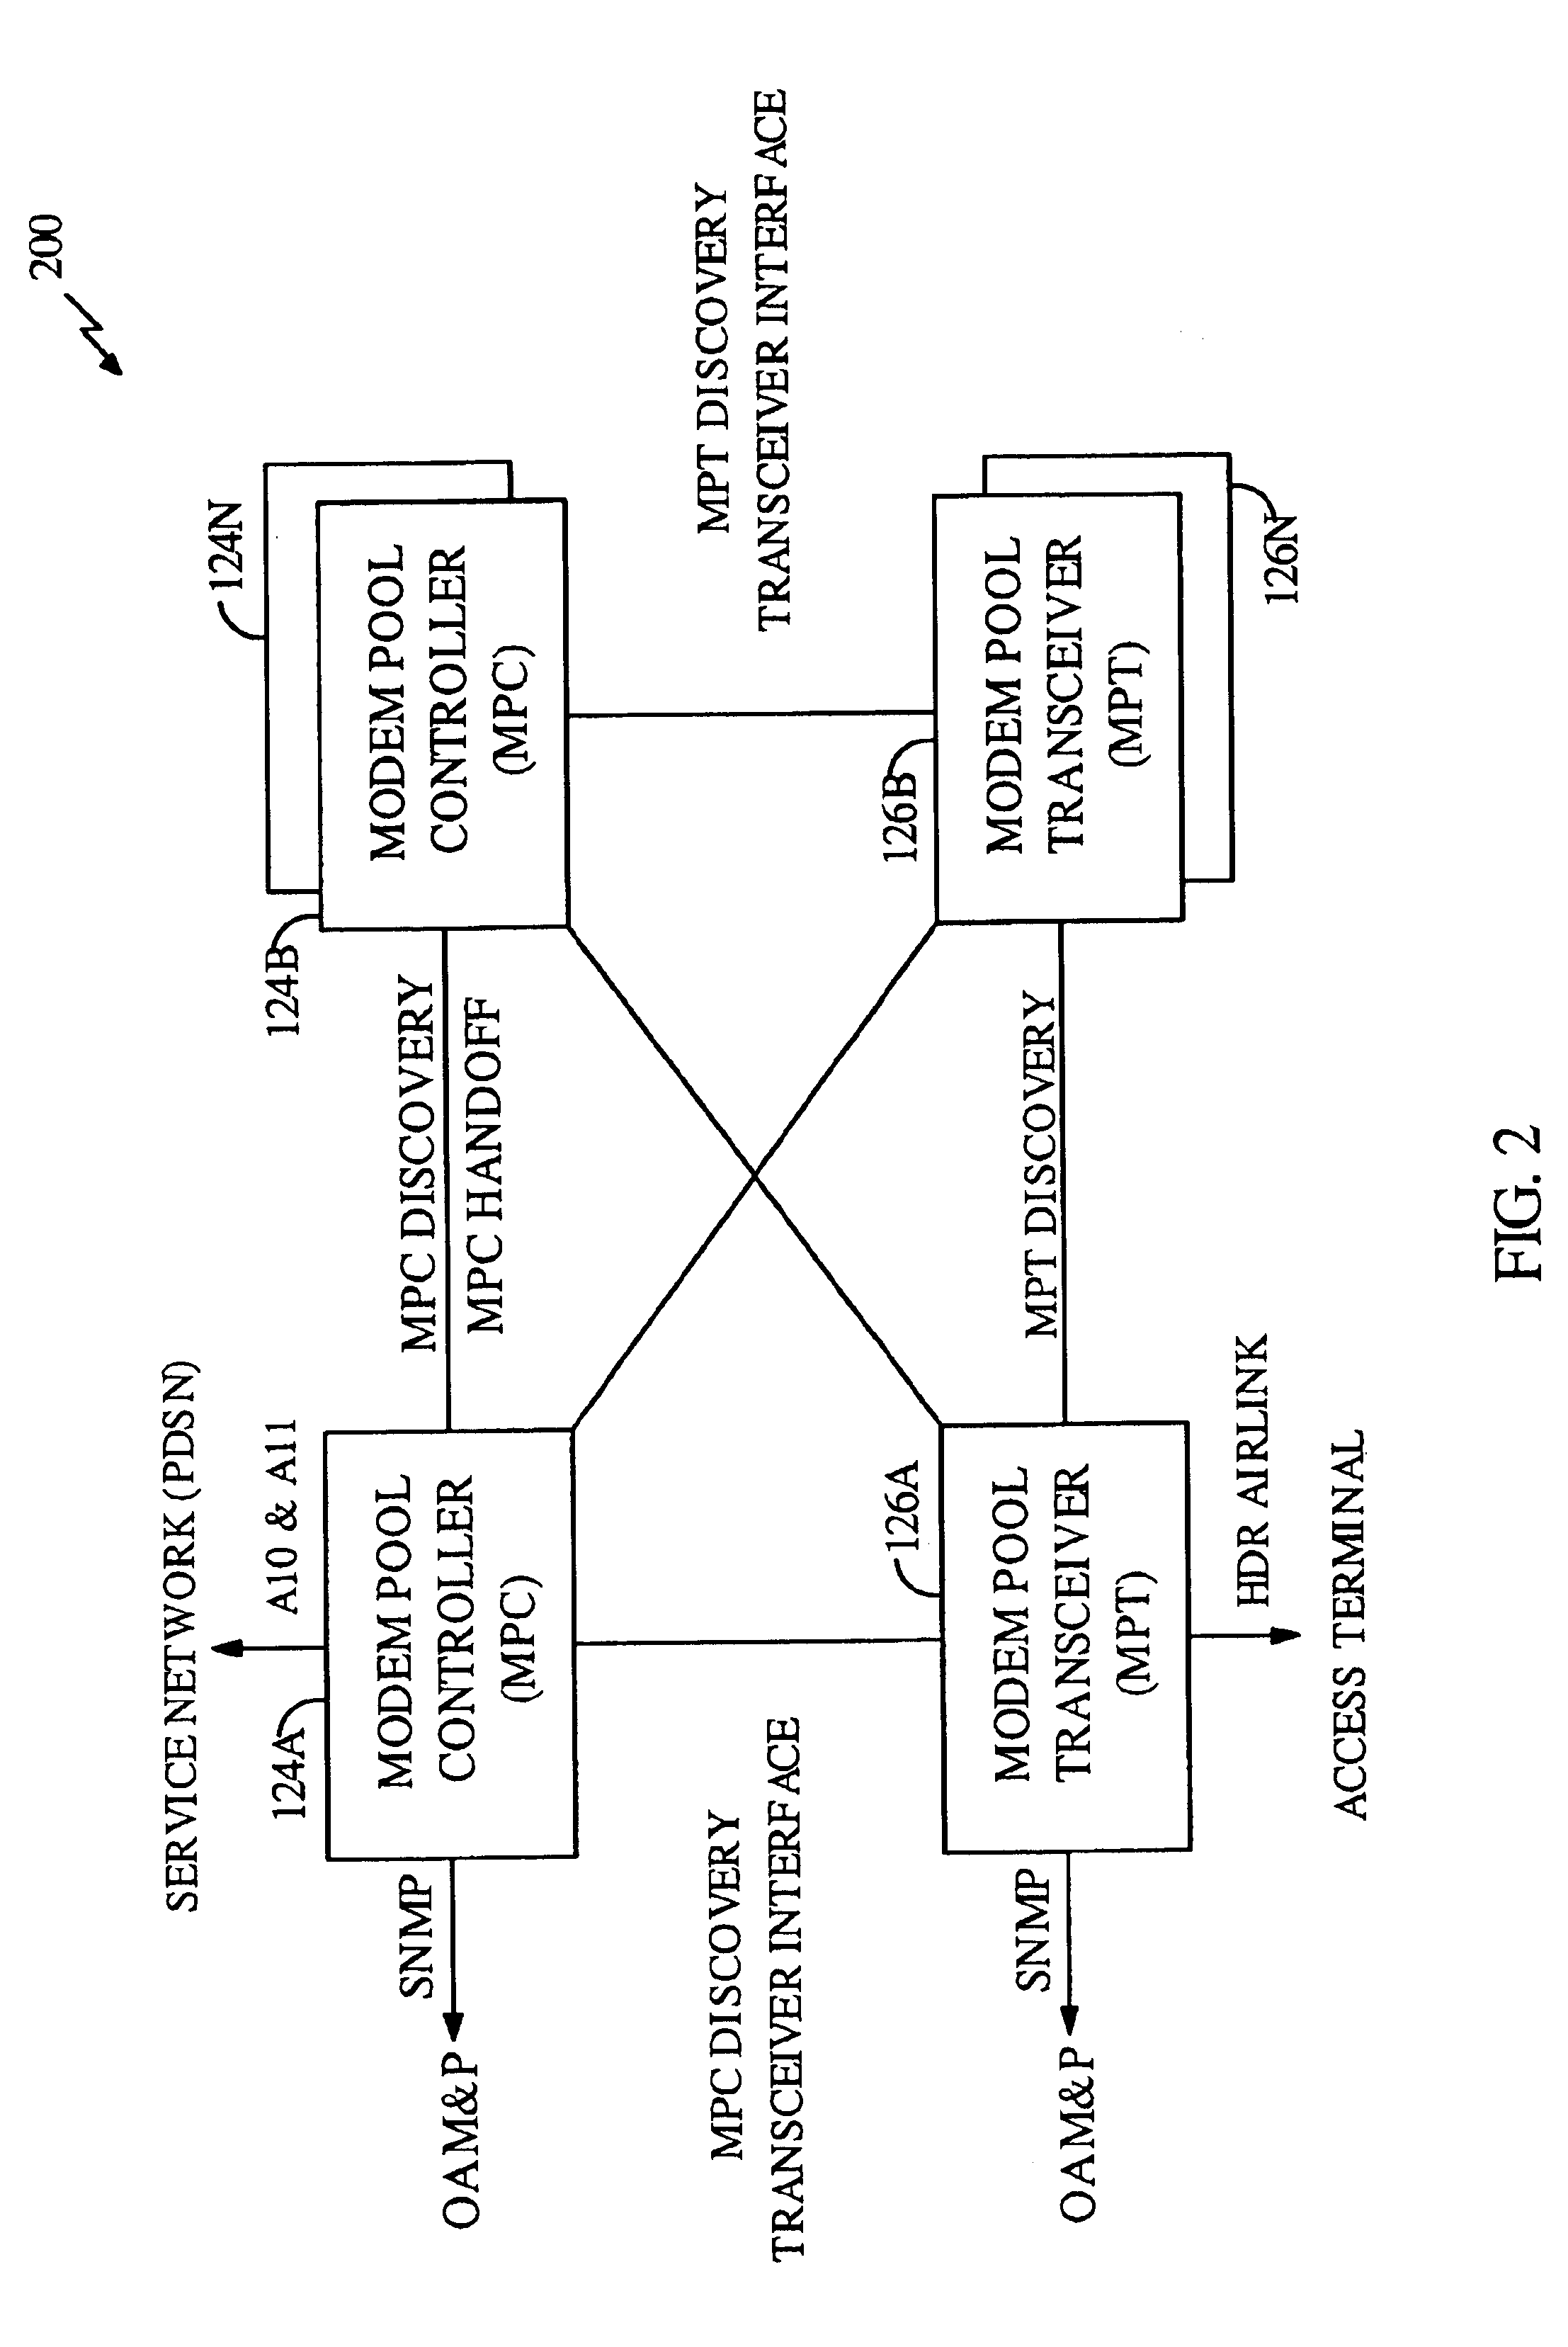 High data rate wireless packet data communications system